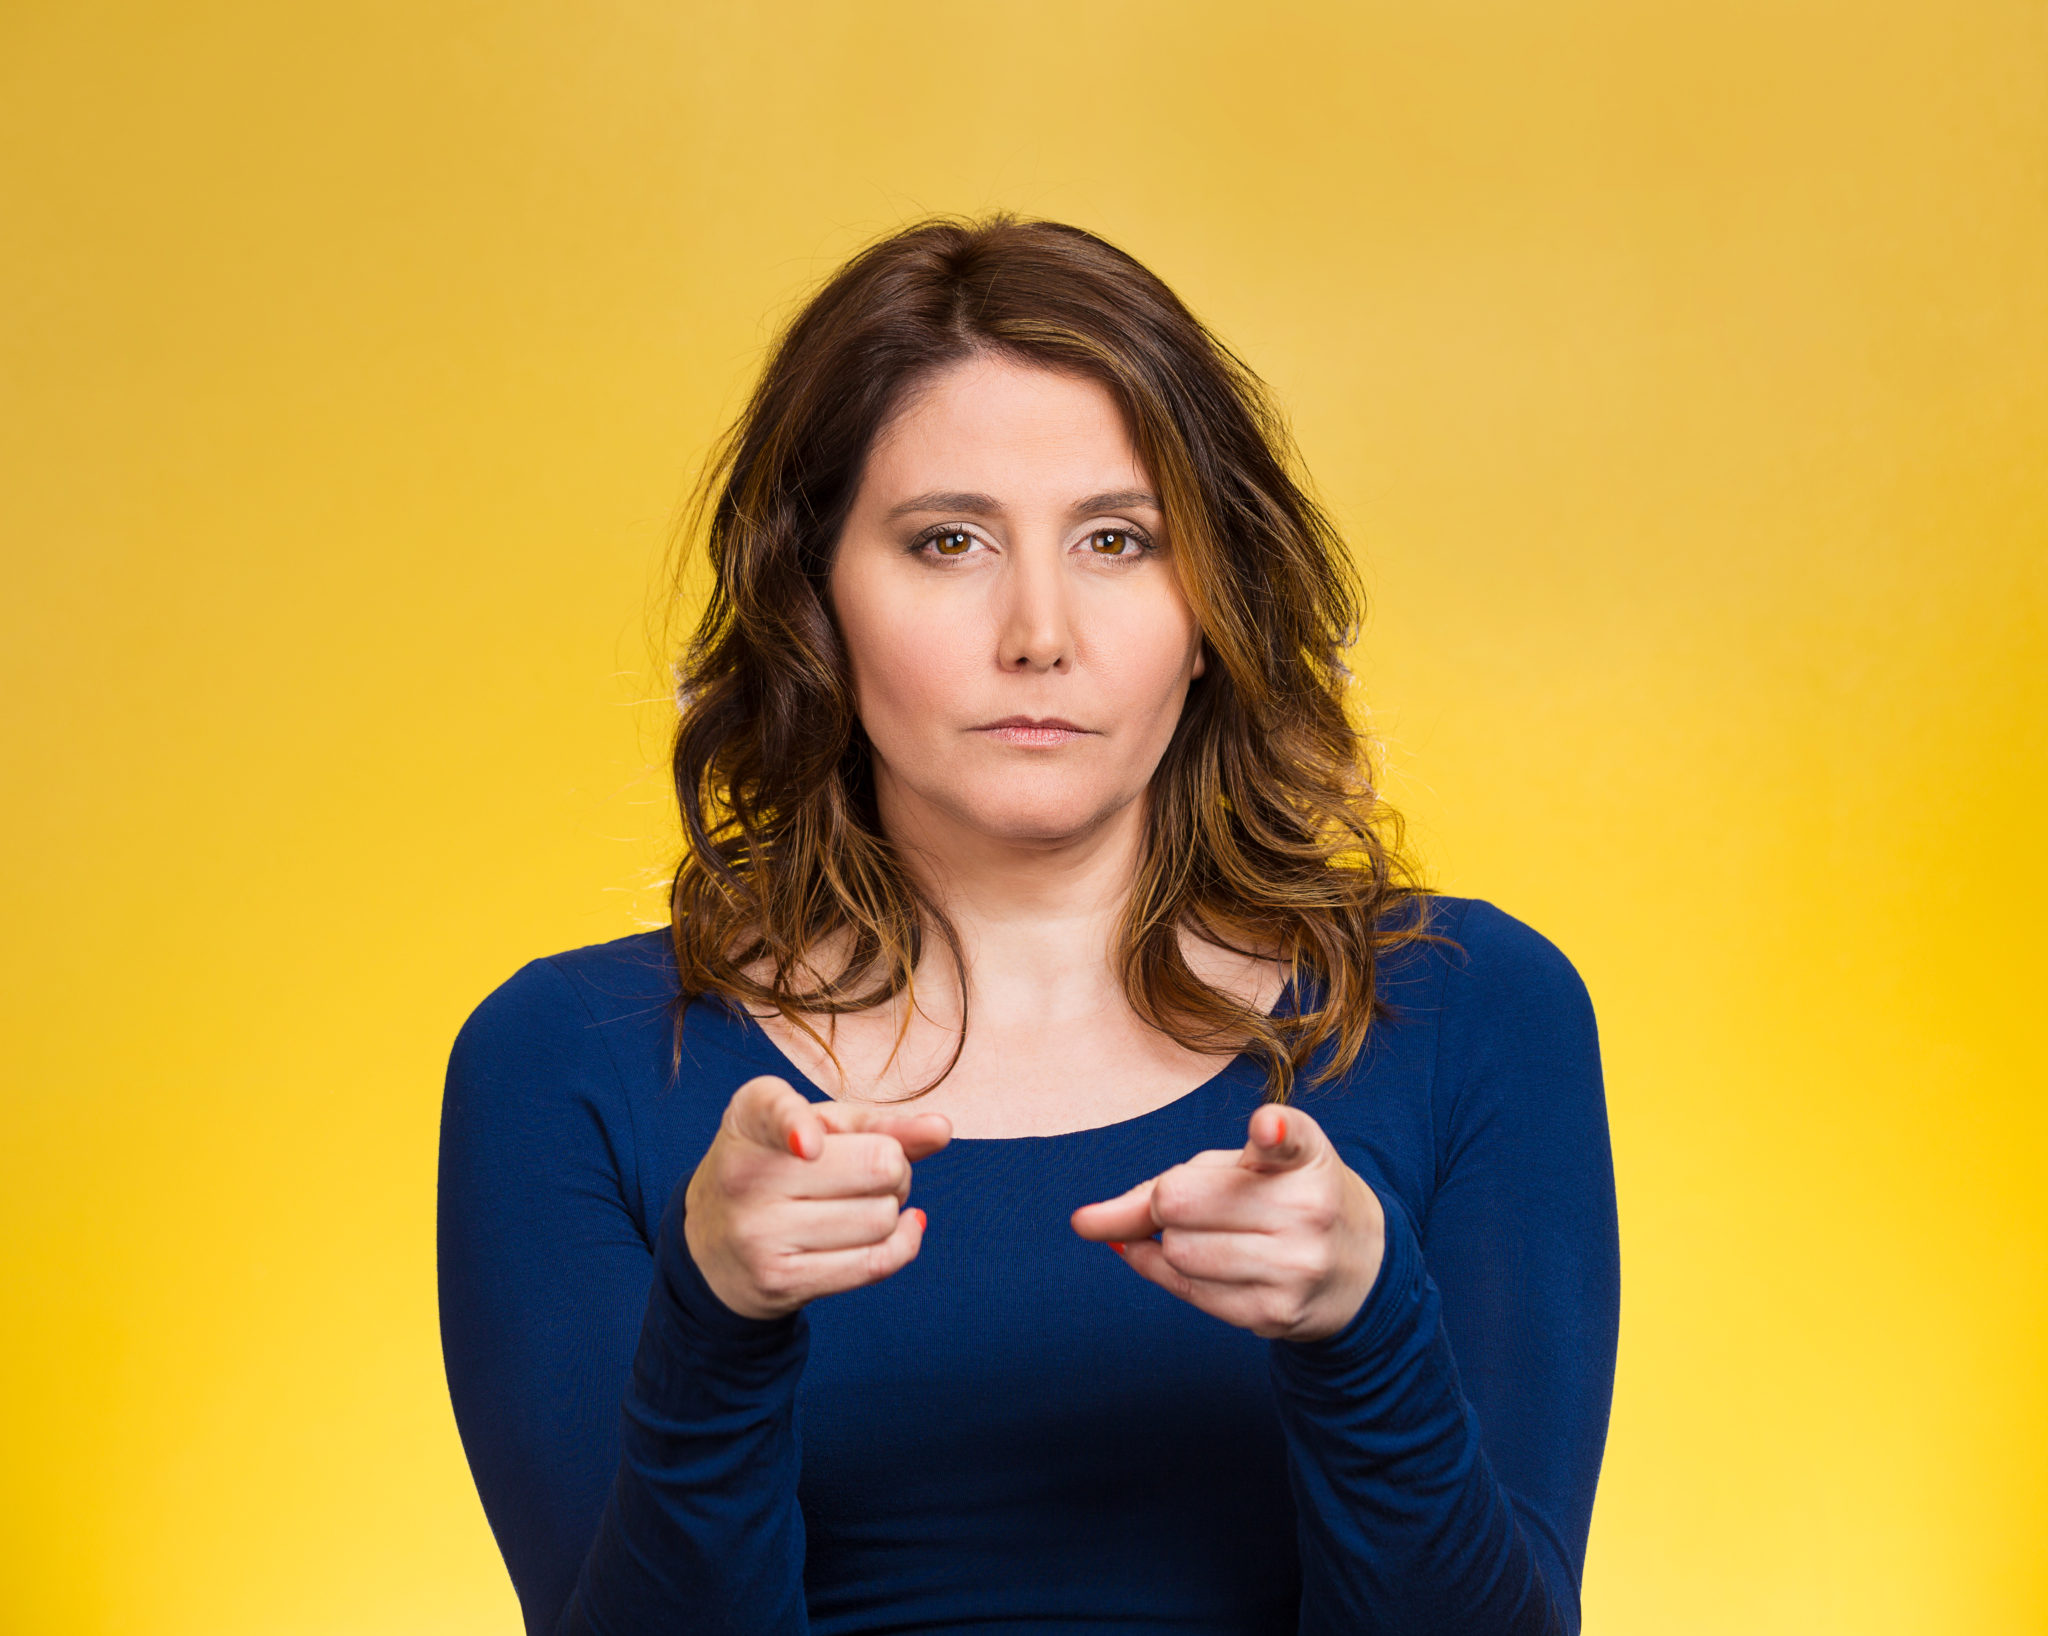 Portrait young, unhappy, serious woman pointing finger at someone, blaming for something wrong, mistake, isolated yellow background. Negative human emotions, facial expressions, feelings, reaction